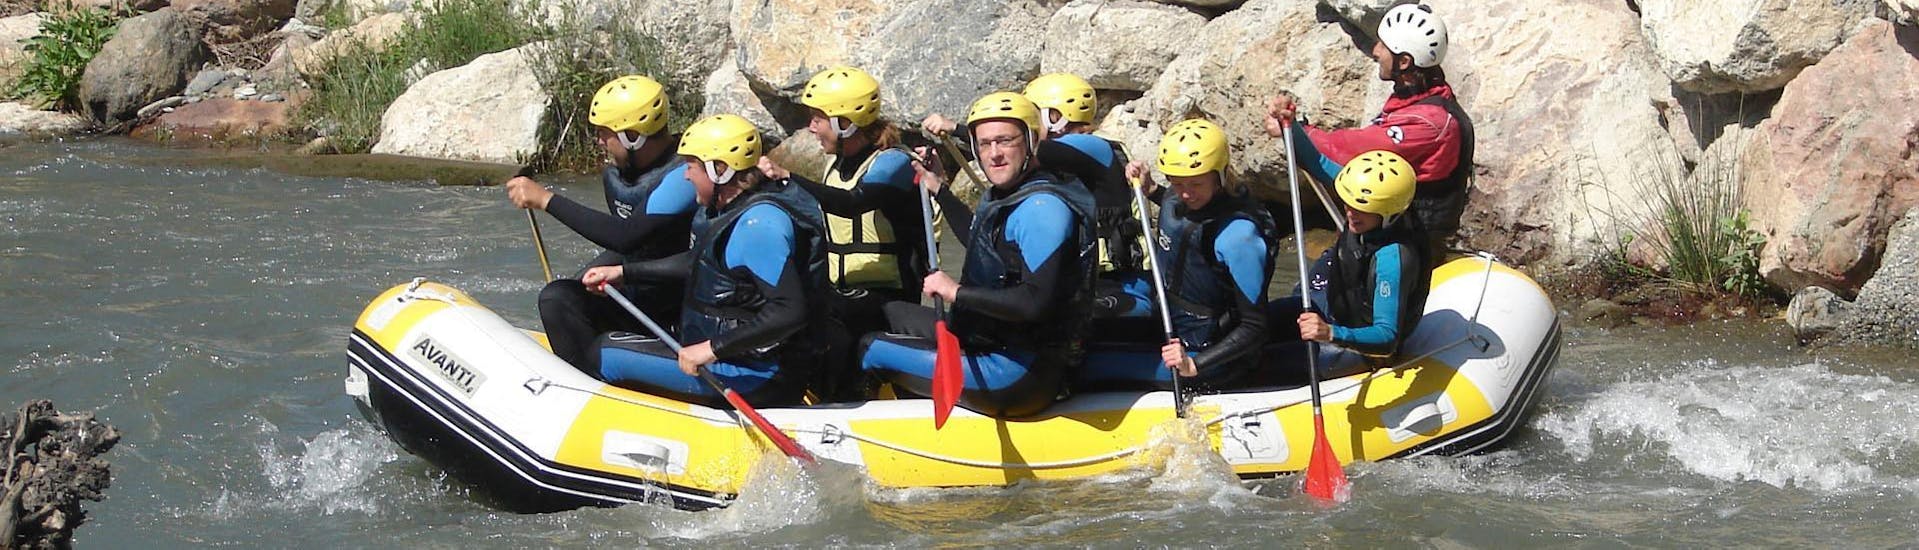 rafting-bachelor-party---rio-guadalfeo-tropical-extreme-hero